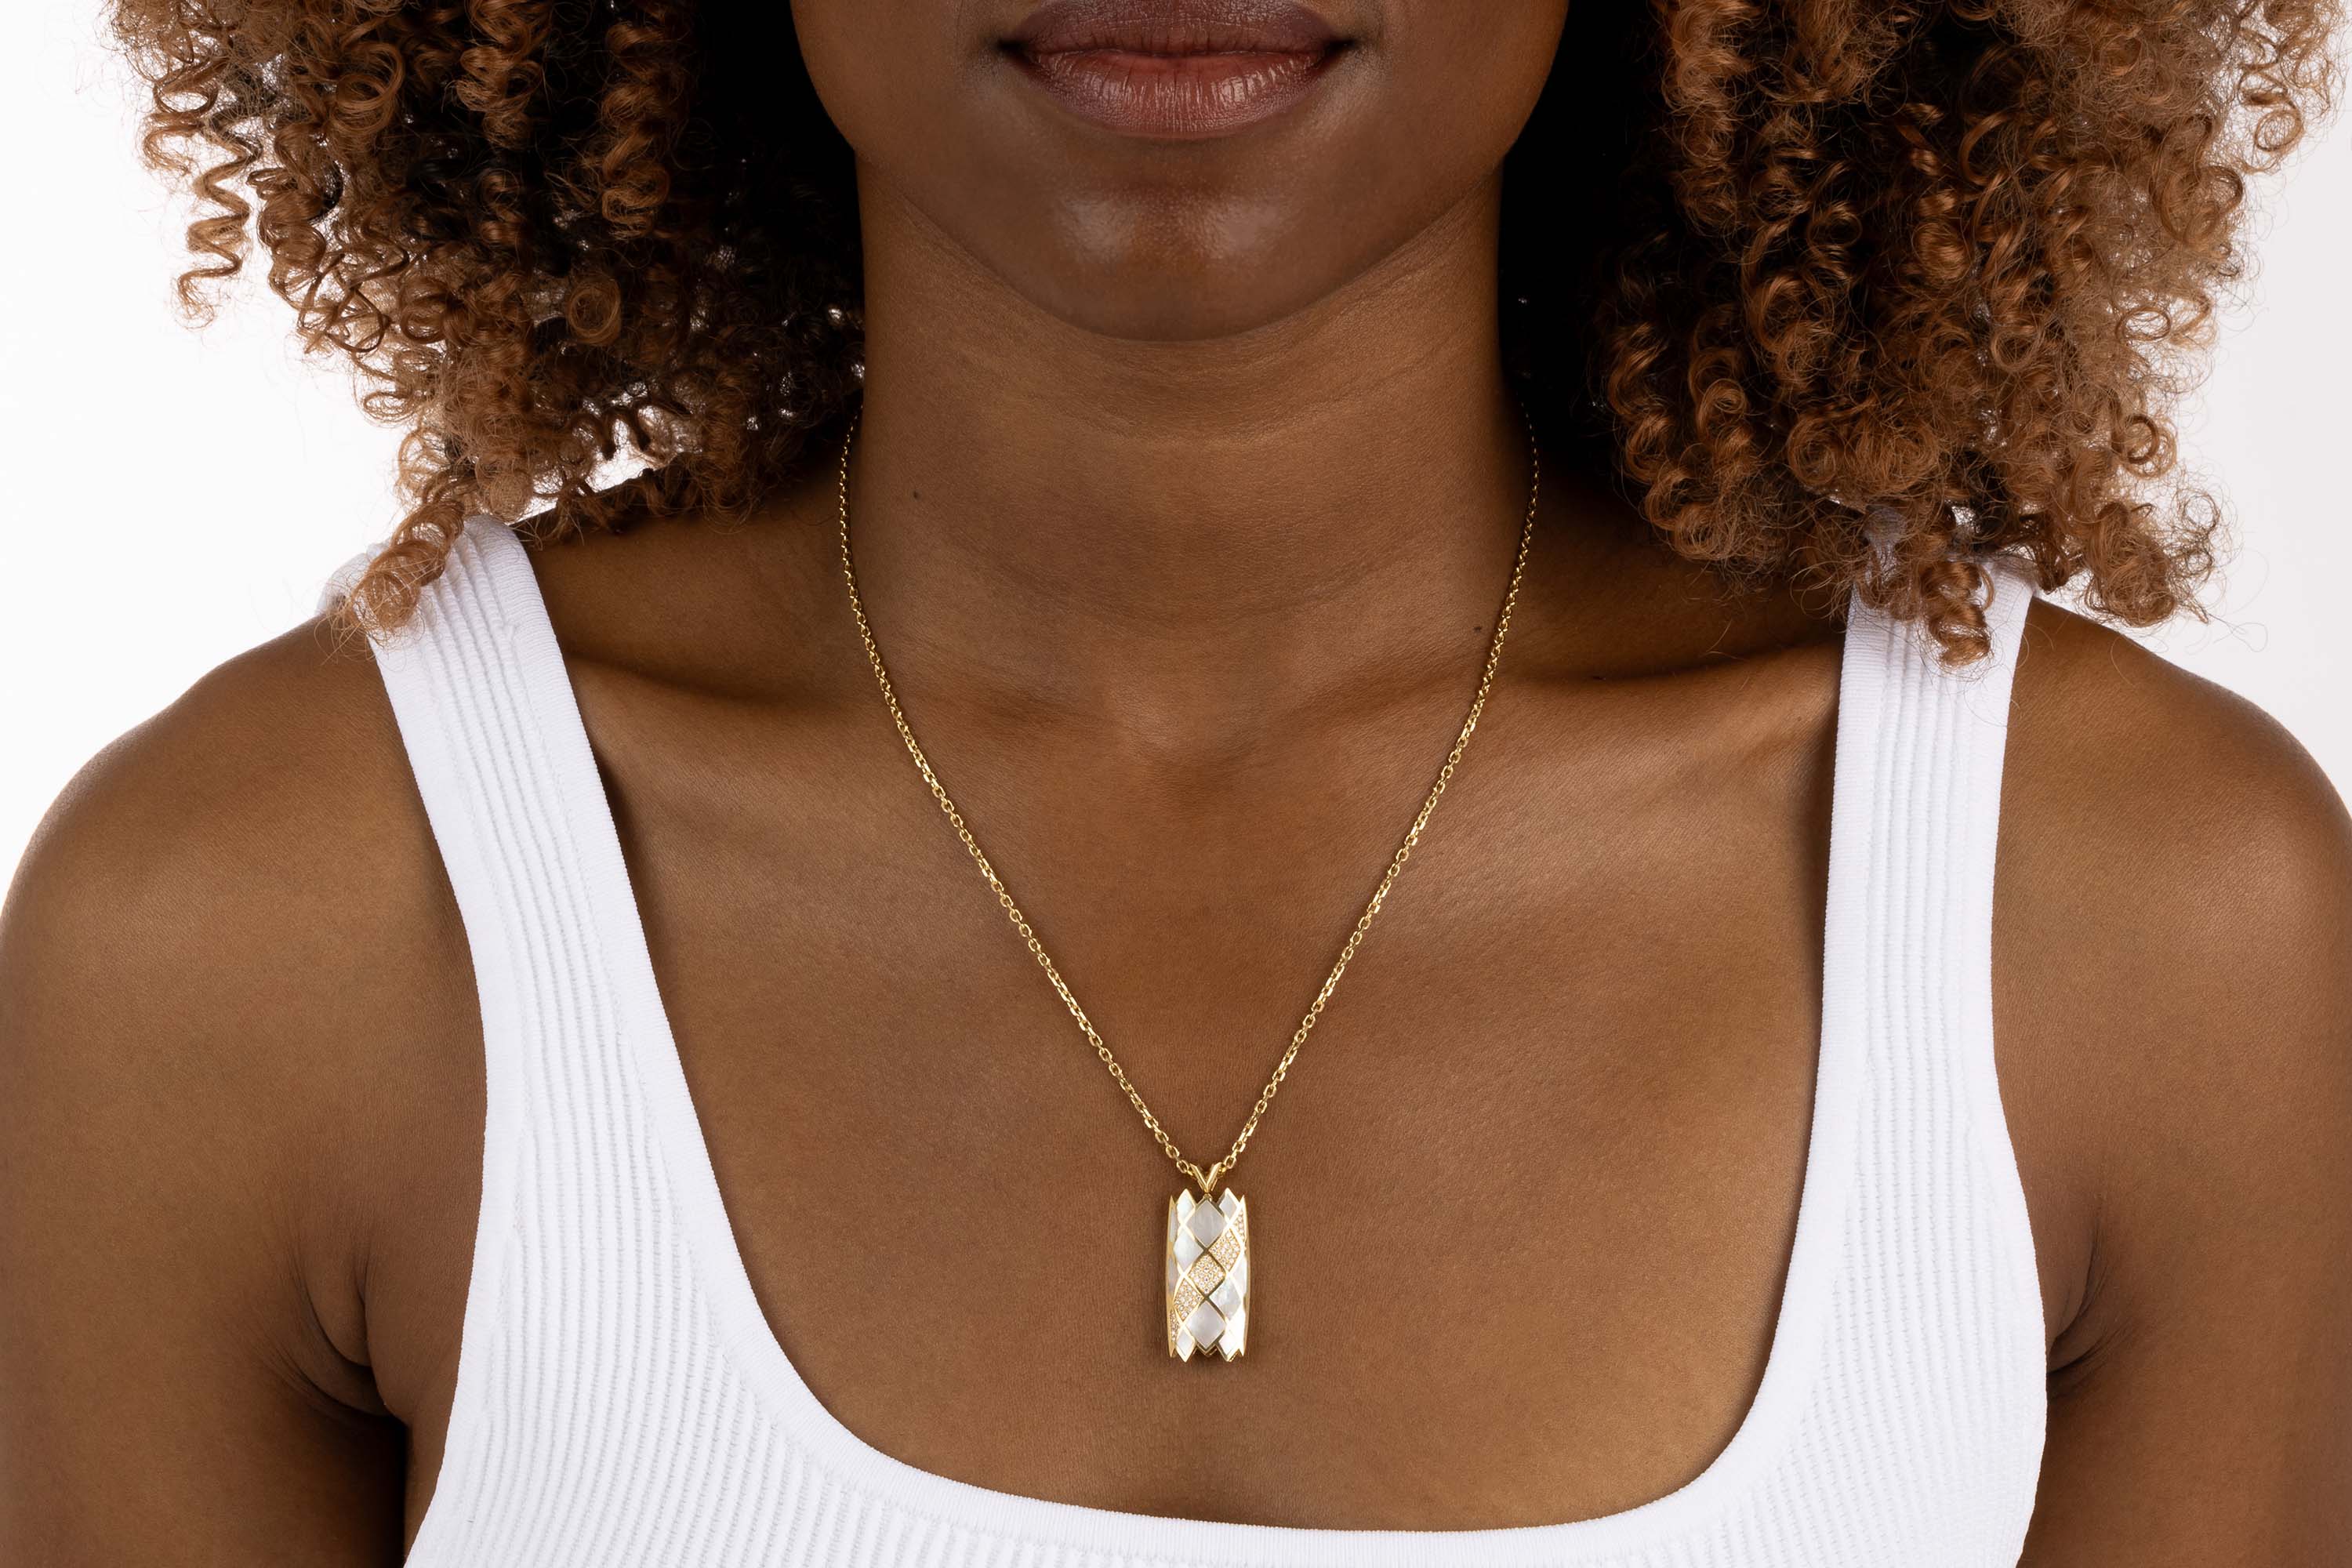 Yellow Gold Necklace with patterned White Shell and small round Diamonds, Medium - Model shot